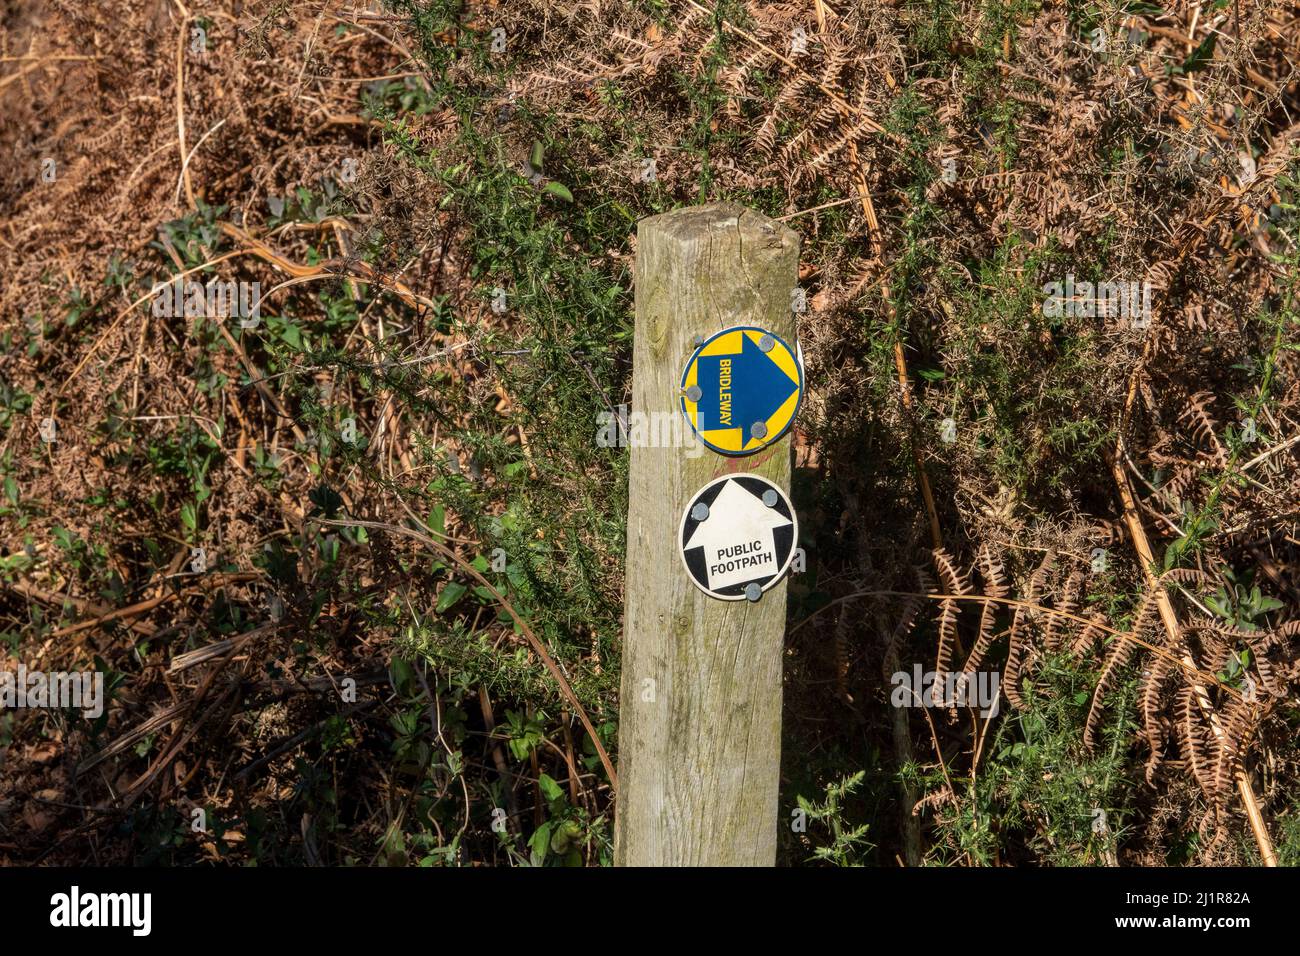 One public footpath sign white on black and one bridleway blue on yellow, both discs on a timber post with dried bracken in background Stock Photo